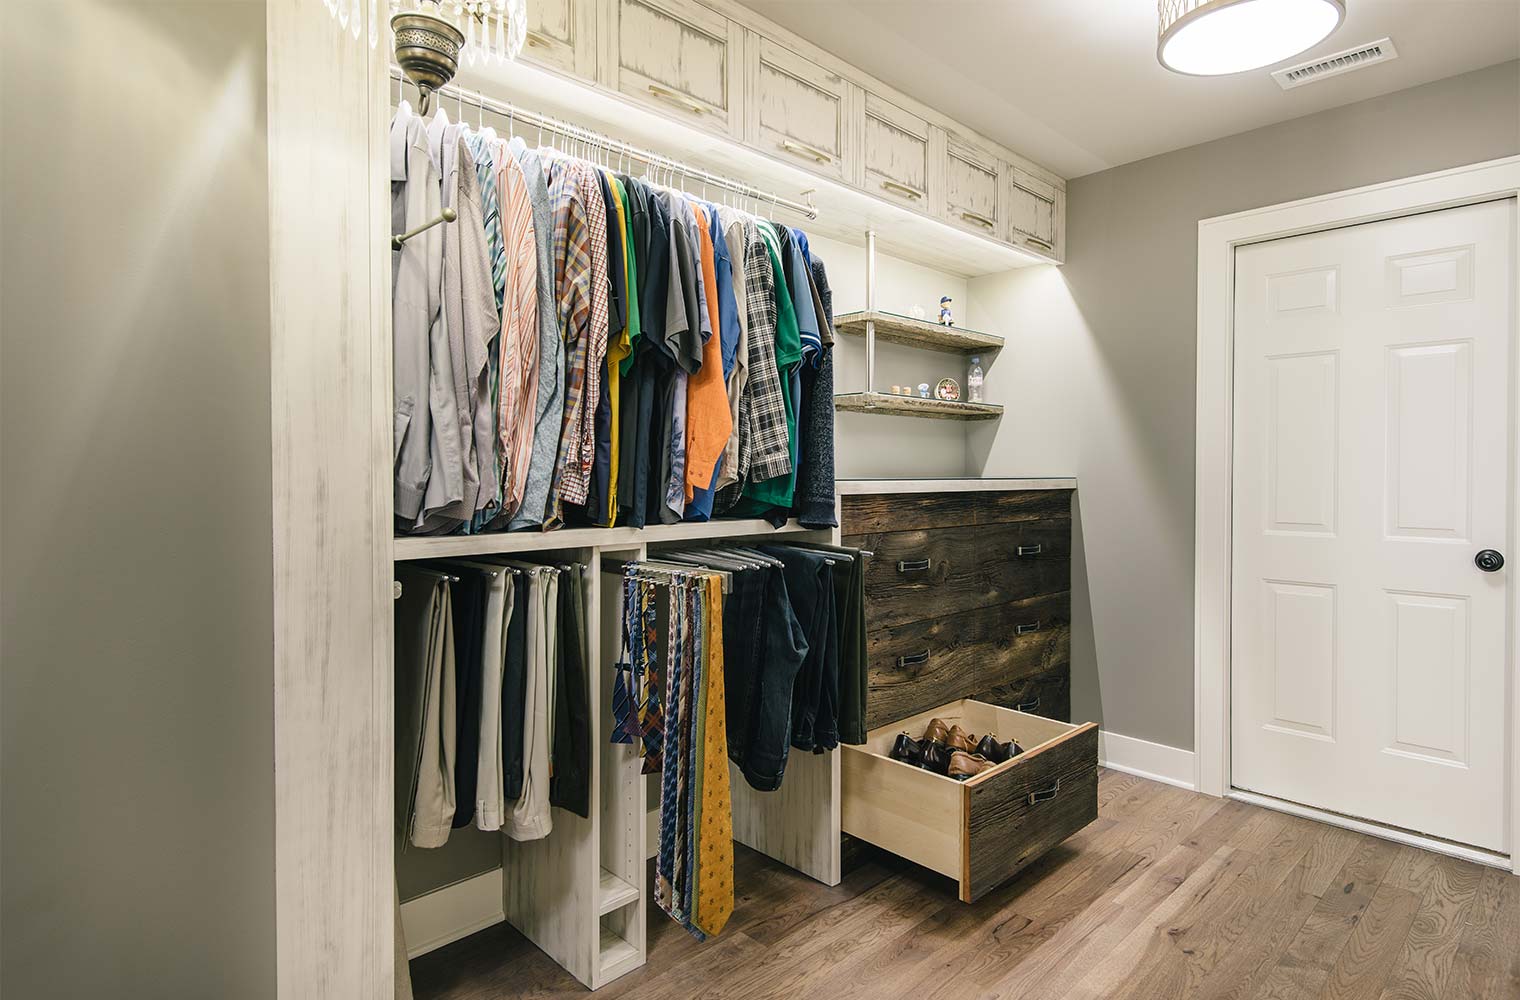 his closet features barn wood drawer fronts, pull out pant and tie racks, shoe drawers in master suite by designer and remodeler Silent Rivers of Des Moines, Iowa